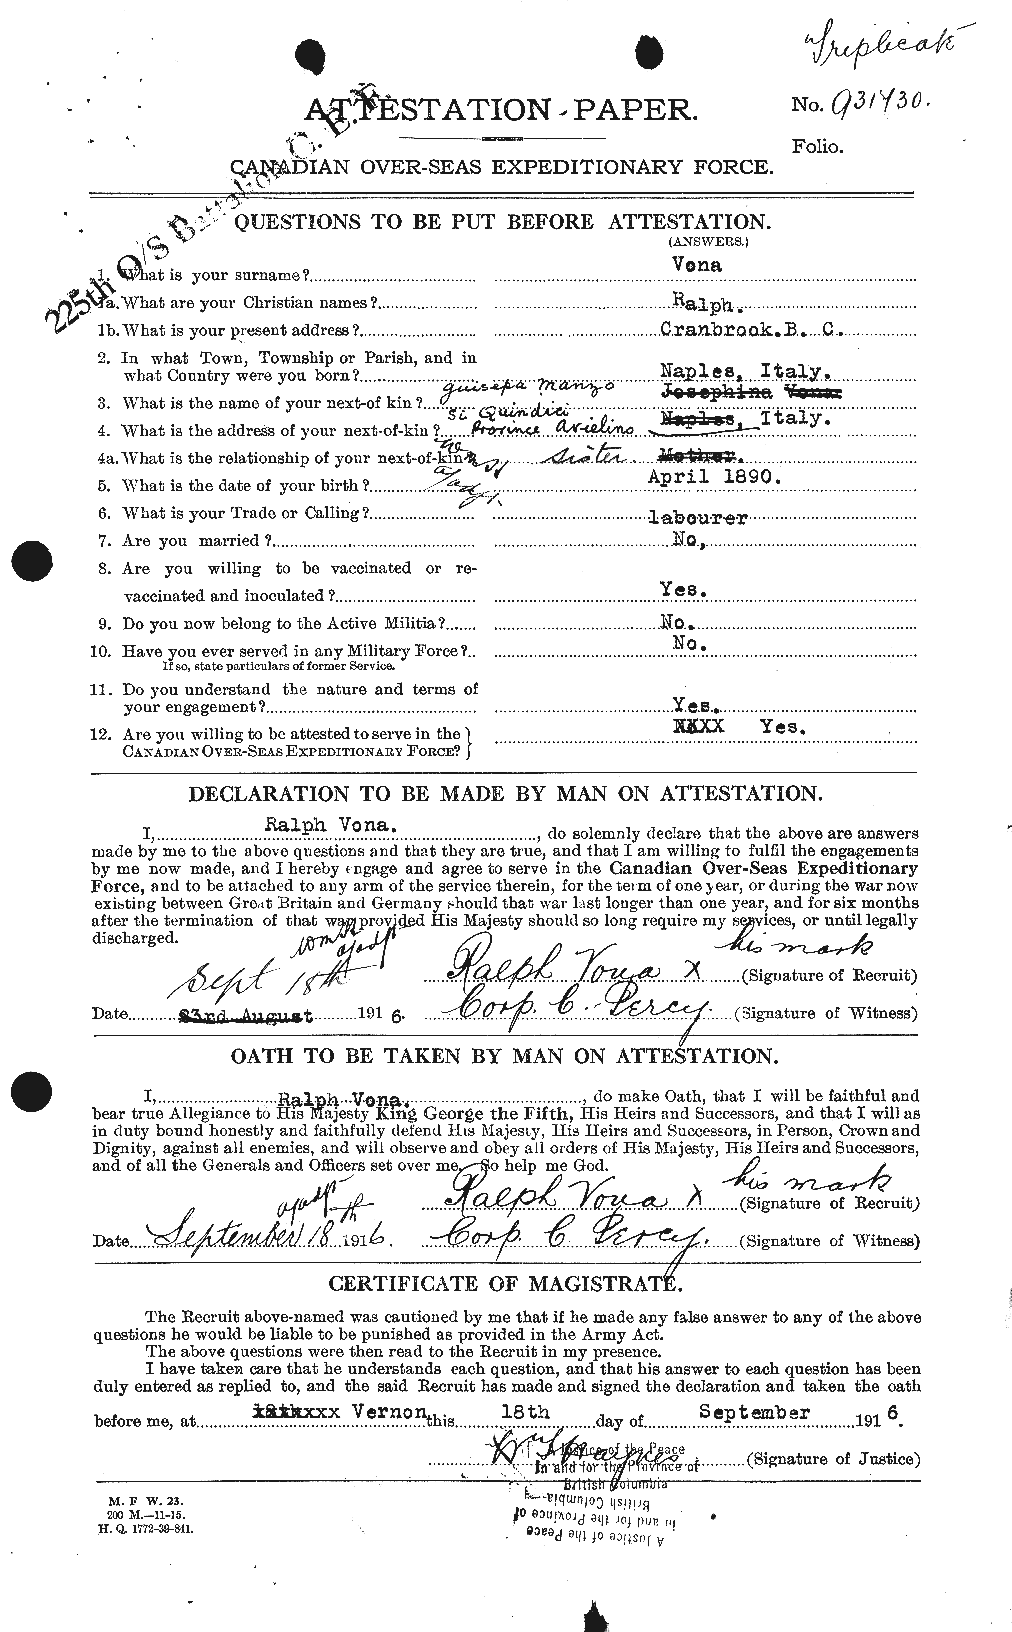 Personnel Records of the First World War - CEF 650749a